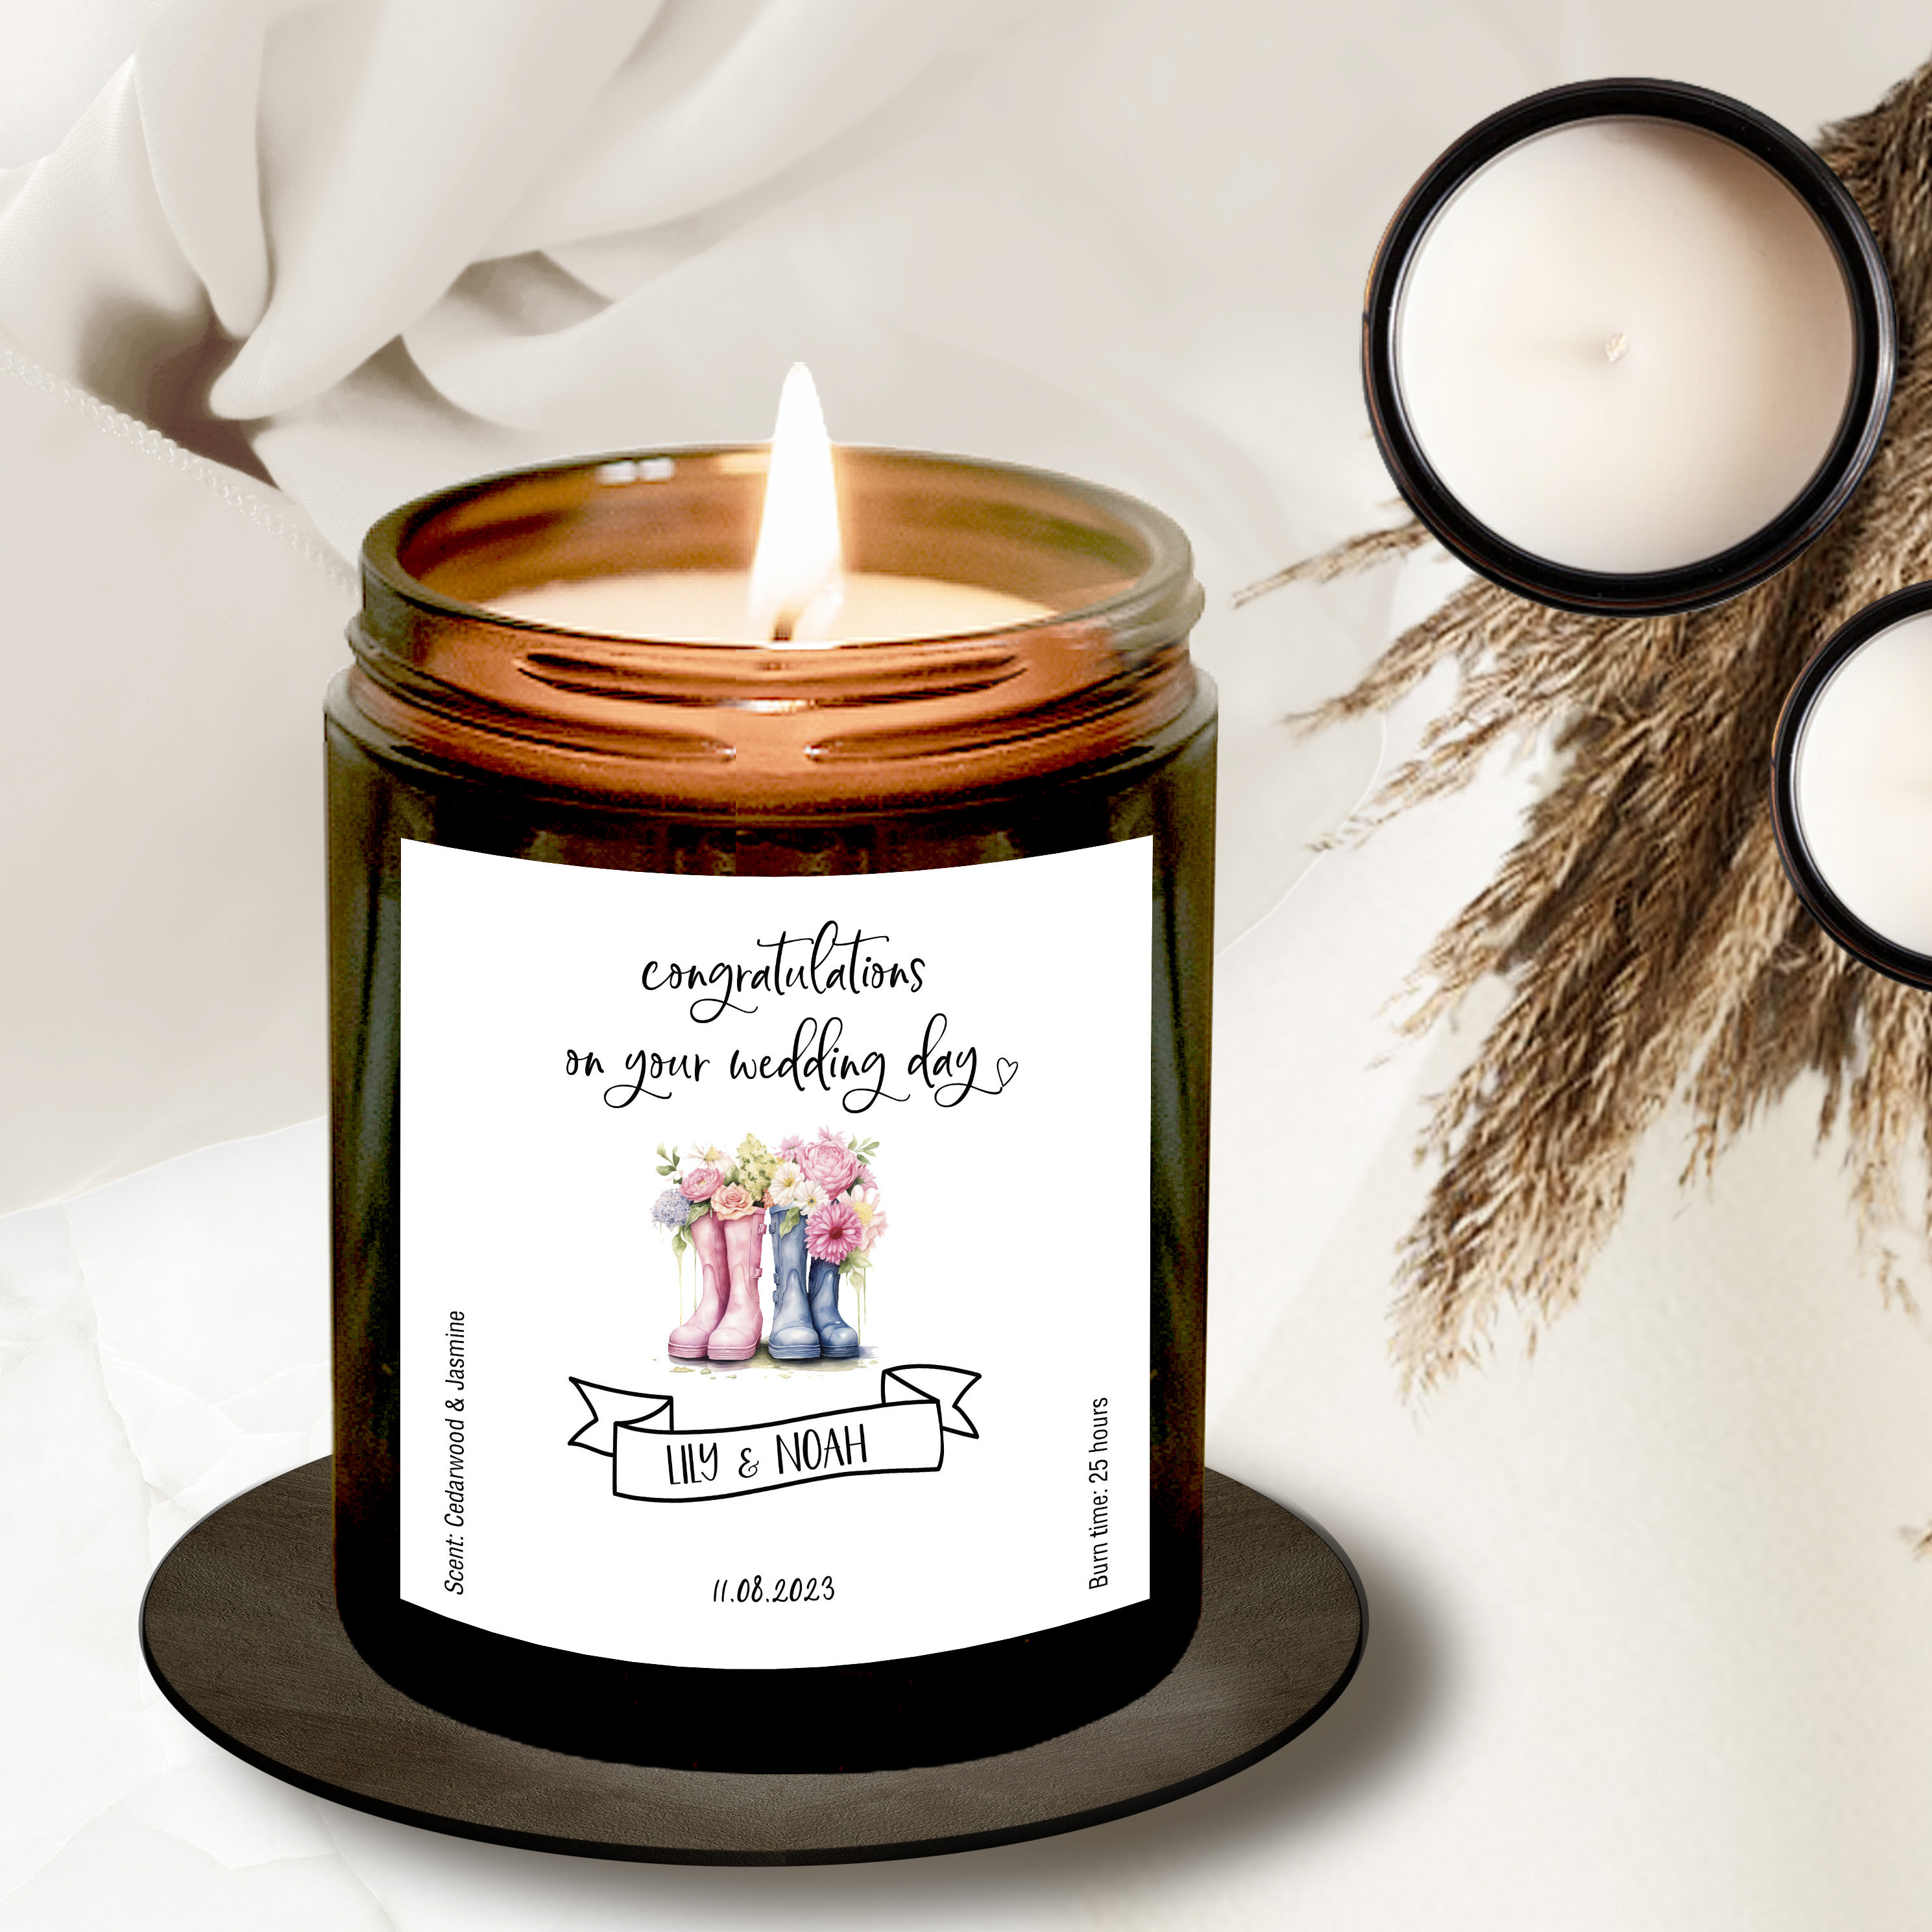 Personalized Candle Labels, Personalized Candle Stickers, Candle Stickers,  Personalized Candleson Stickers 